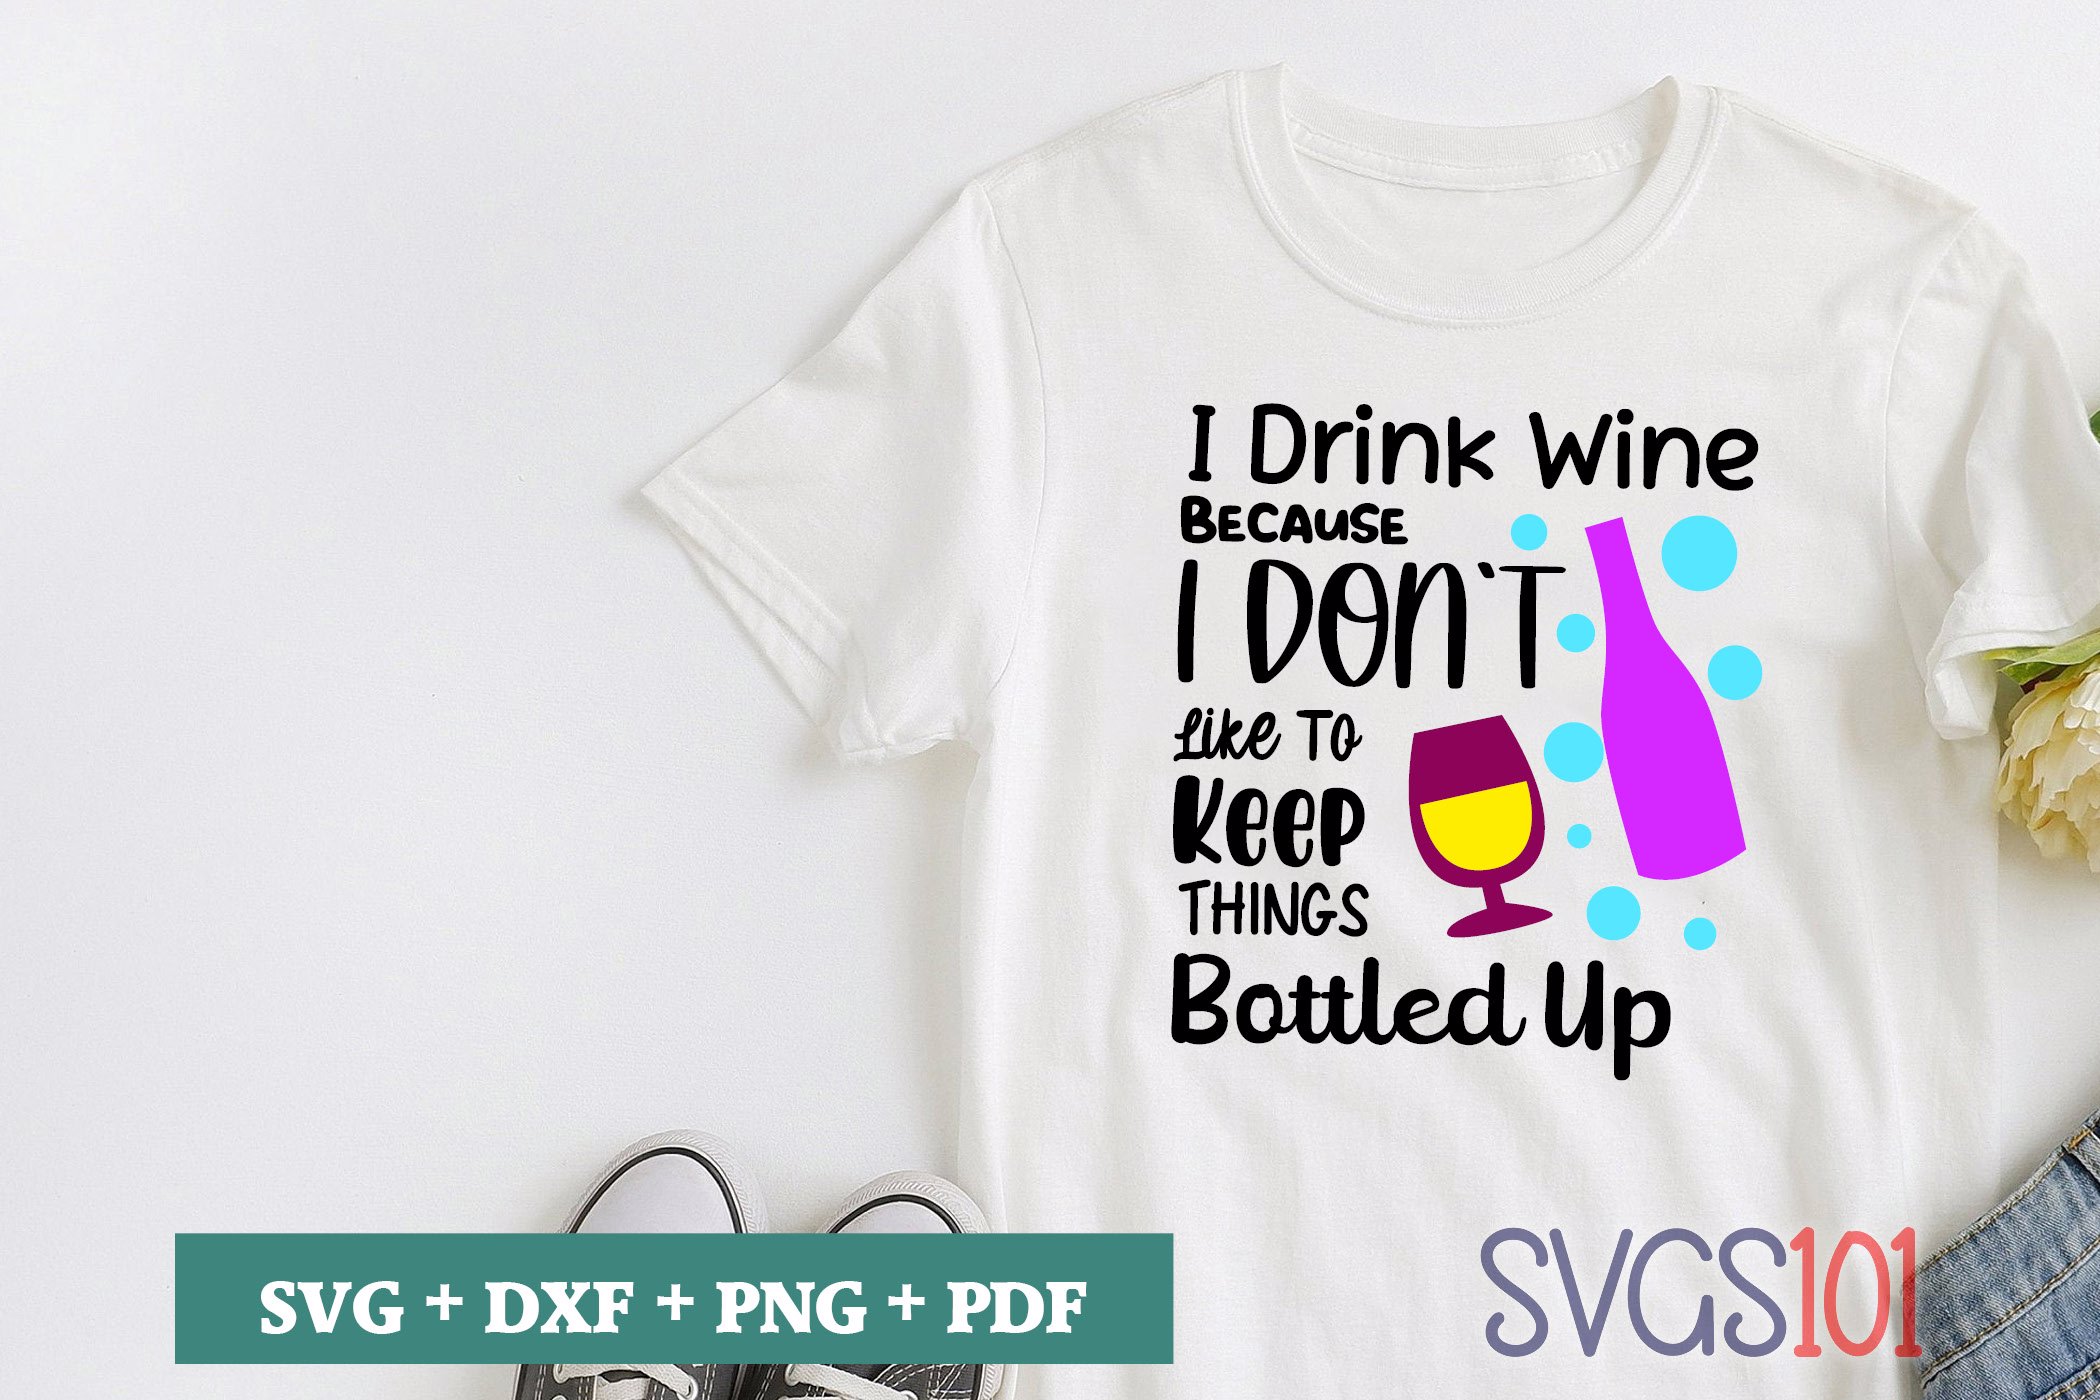 I Drive Wine Because I Dont Like To Keep Things Bottled Up